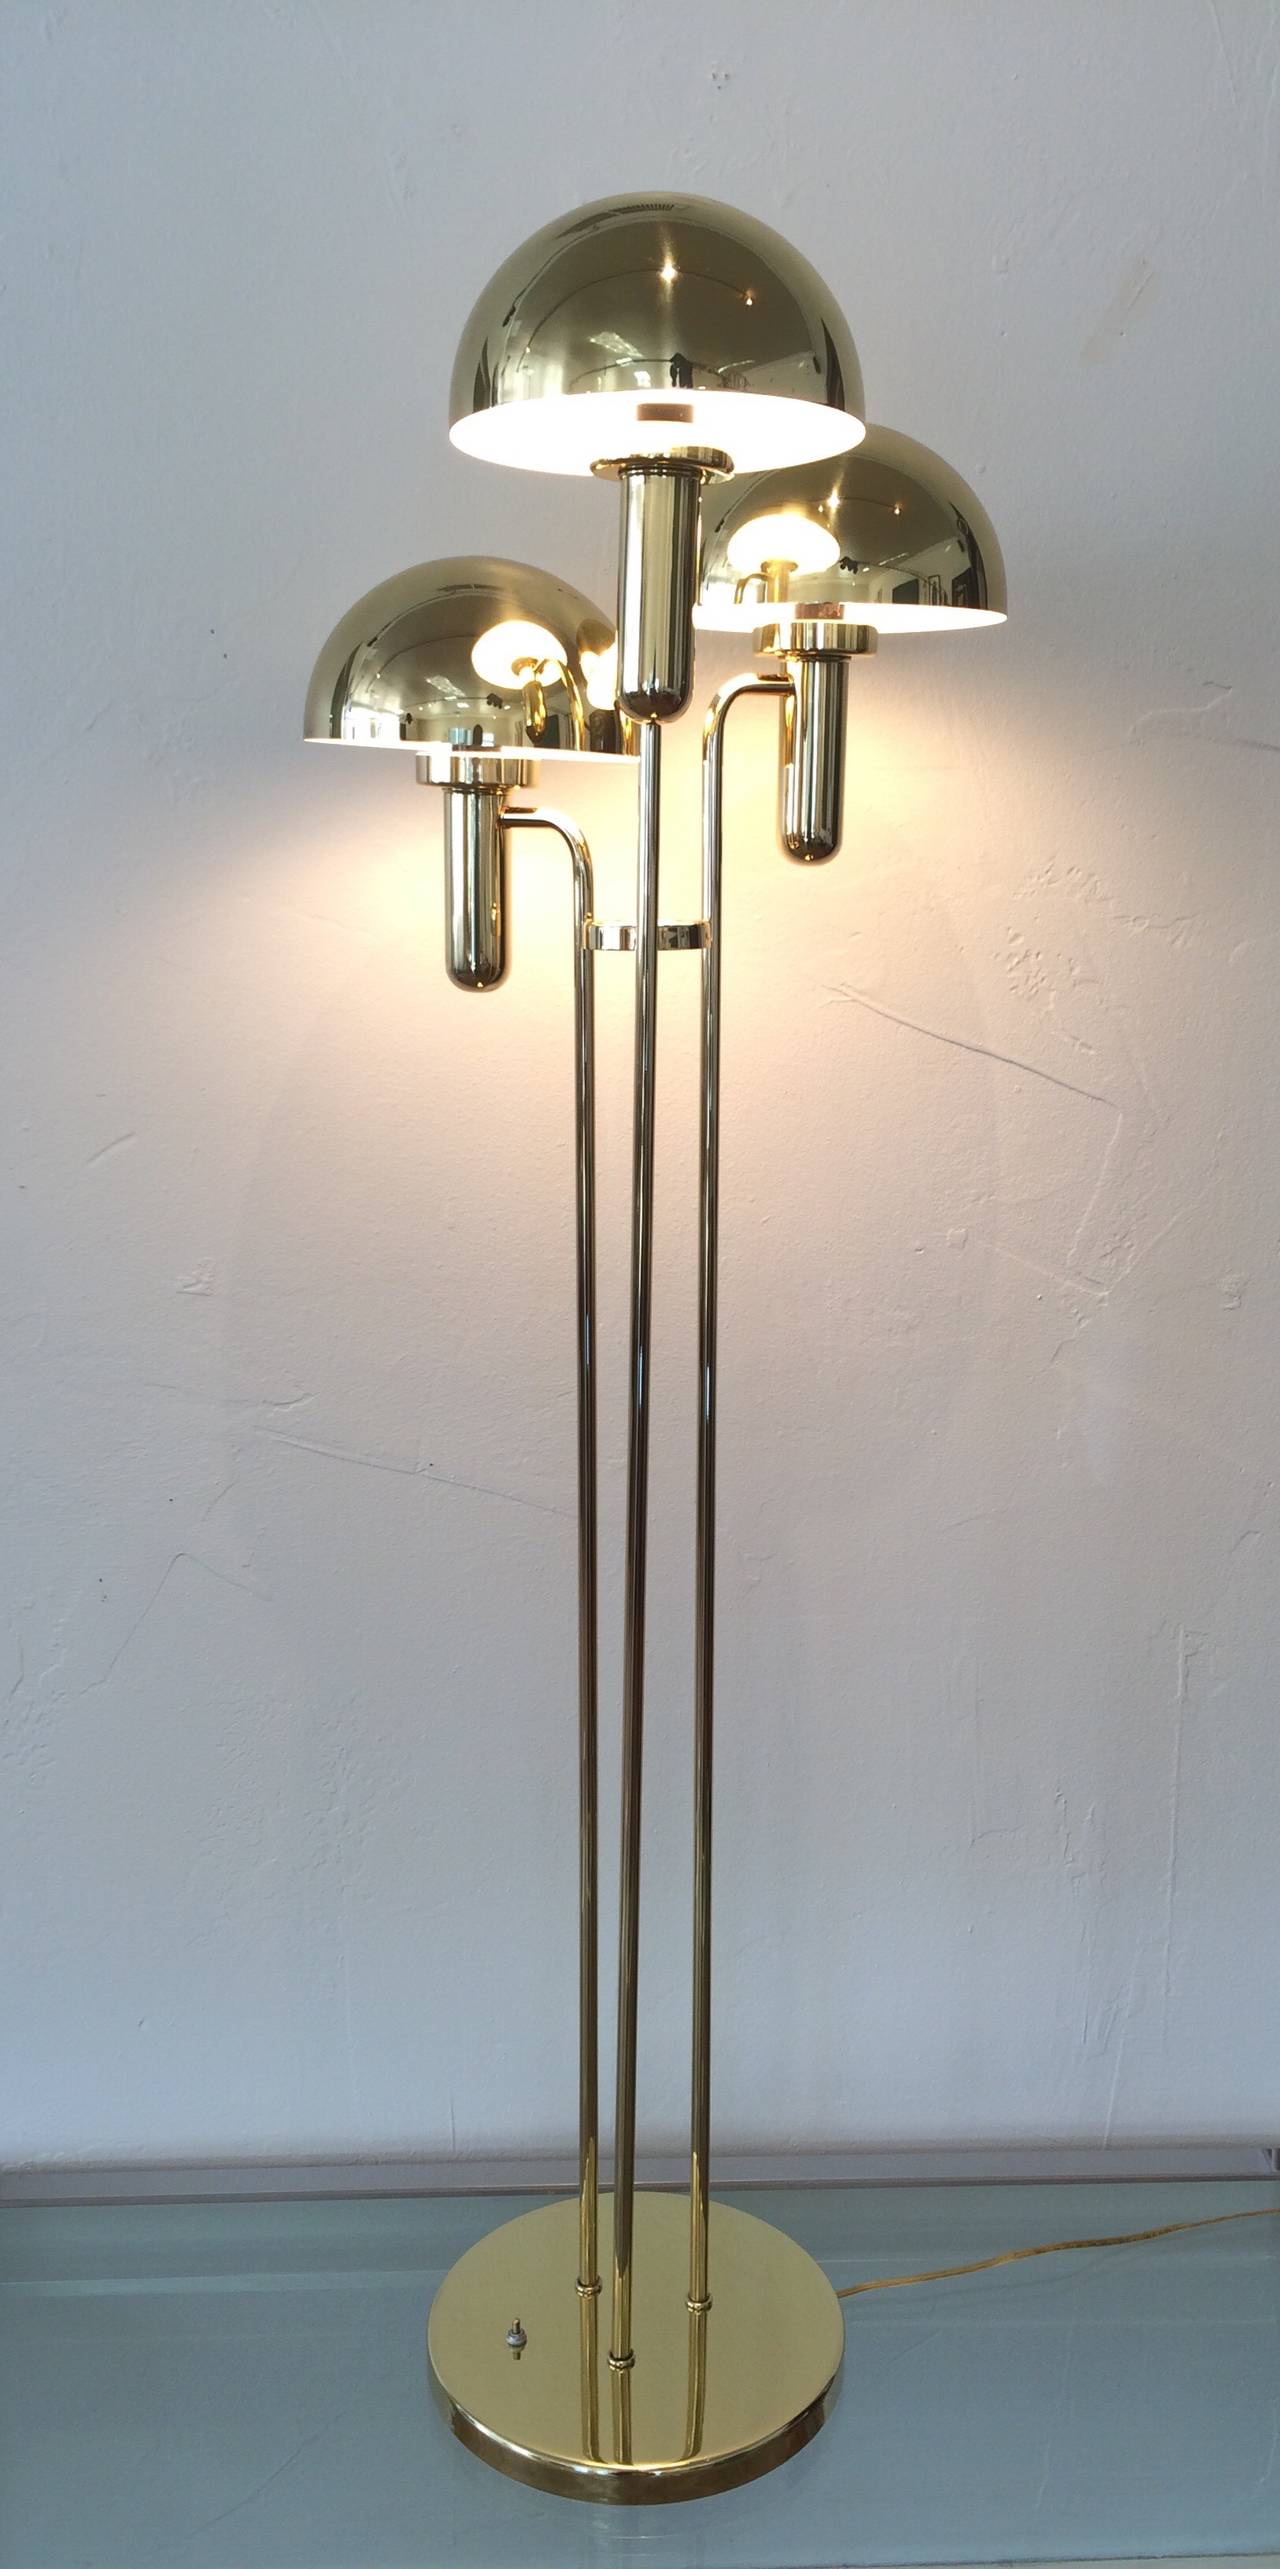 This newly rewired vintage polished brass floor lamp is in the style of Verner Panton. 
Three different height brass rods each have a socket that takes a normal lightbulb. 
Each lightbulb then supports a polished brass light shade to complete this